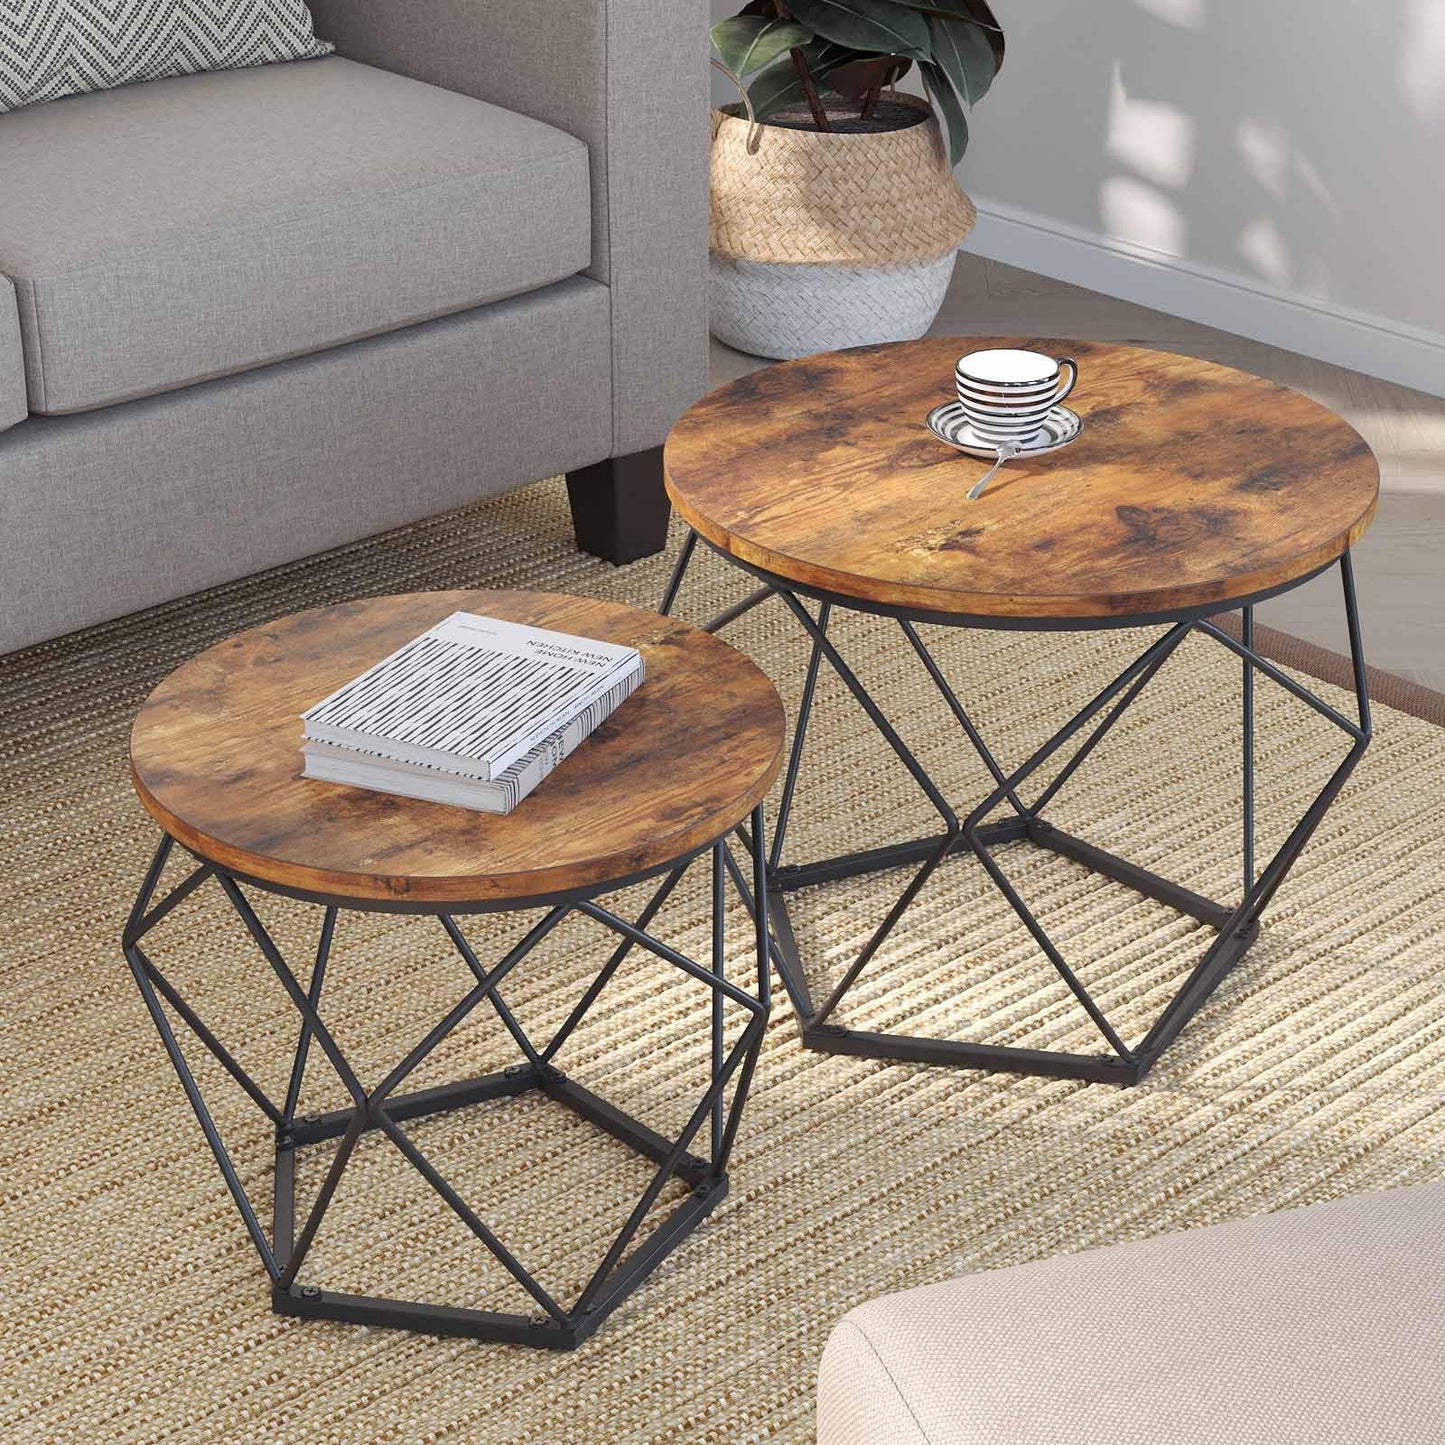 HYGRAD BUILT TO SURVIVE 2 x Set Of Round Industrial Look Rustic End Nesting Side End Tables Stools With Crystal shape Metal Frame